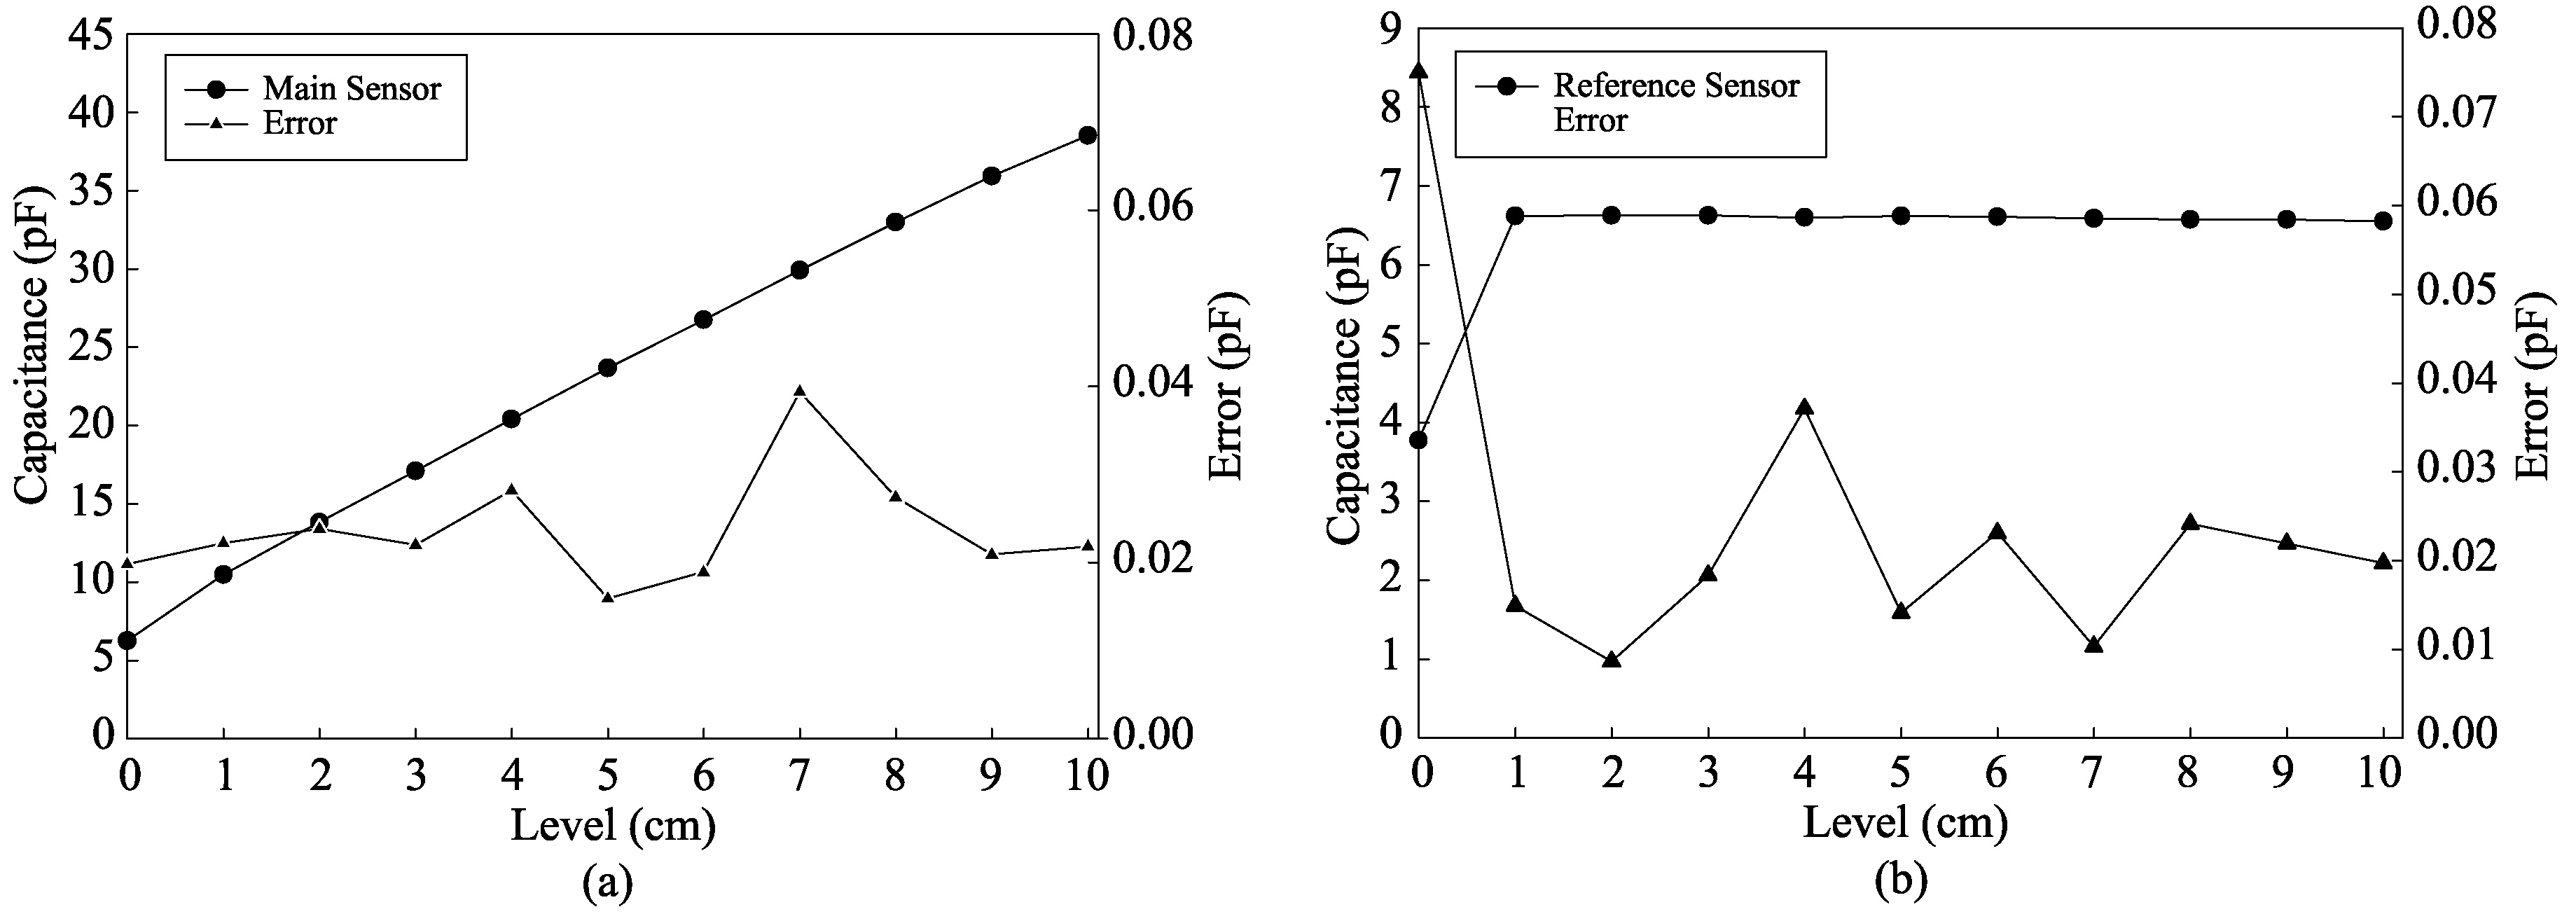 Graph of capacitance value measured by the 4 cm width sensor electrode. (a) Capacitance value of main sensor; (b) capacitance value of reference sensor.